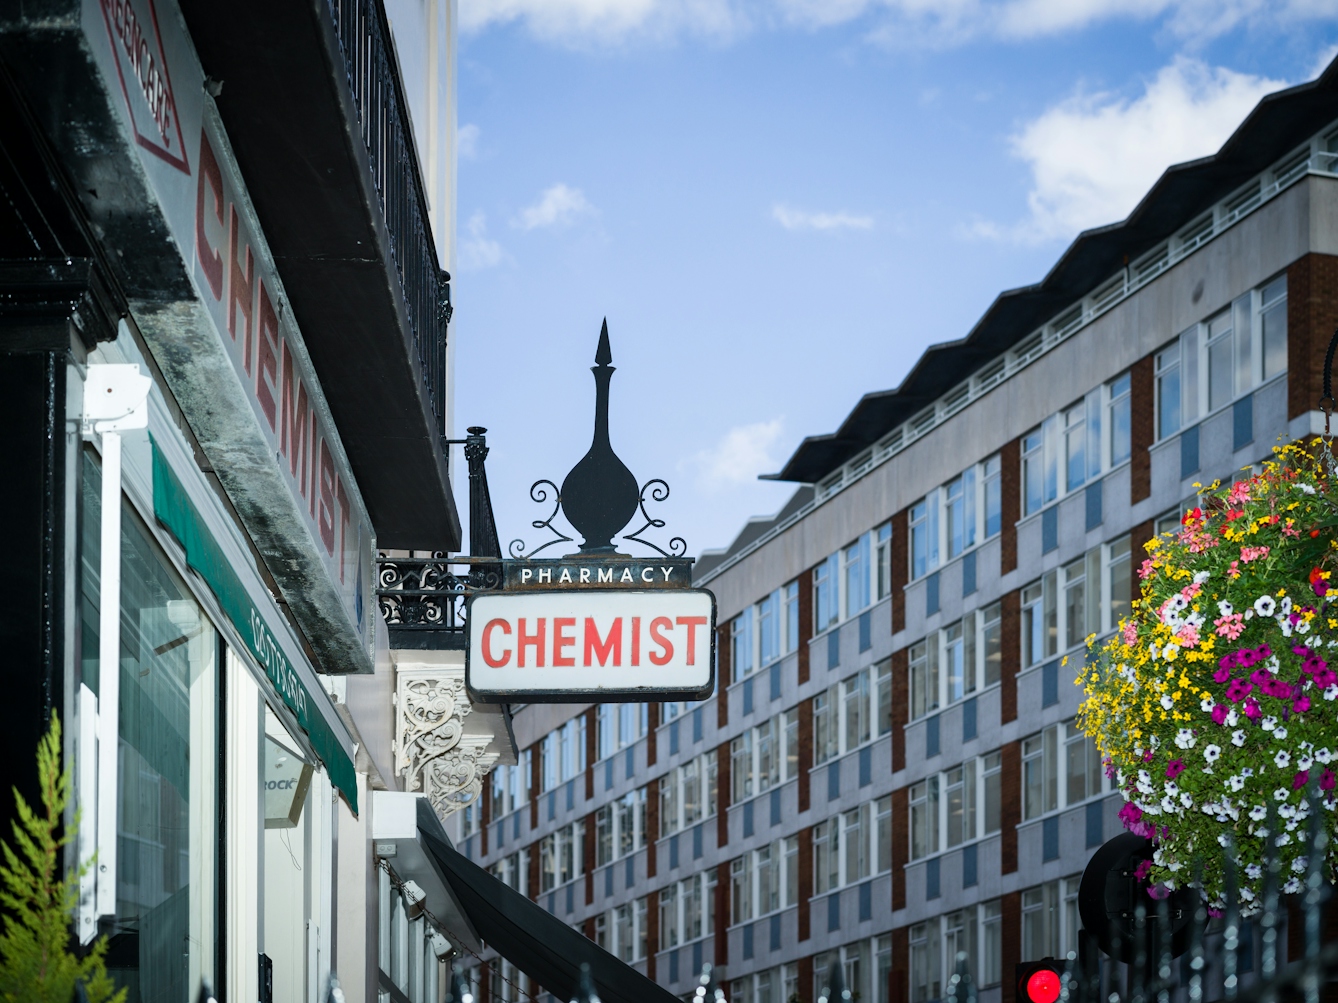 Chemist's sign featuring a traditional medicine jar